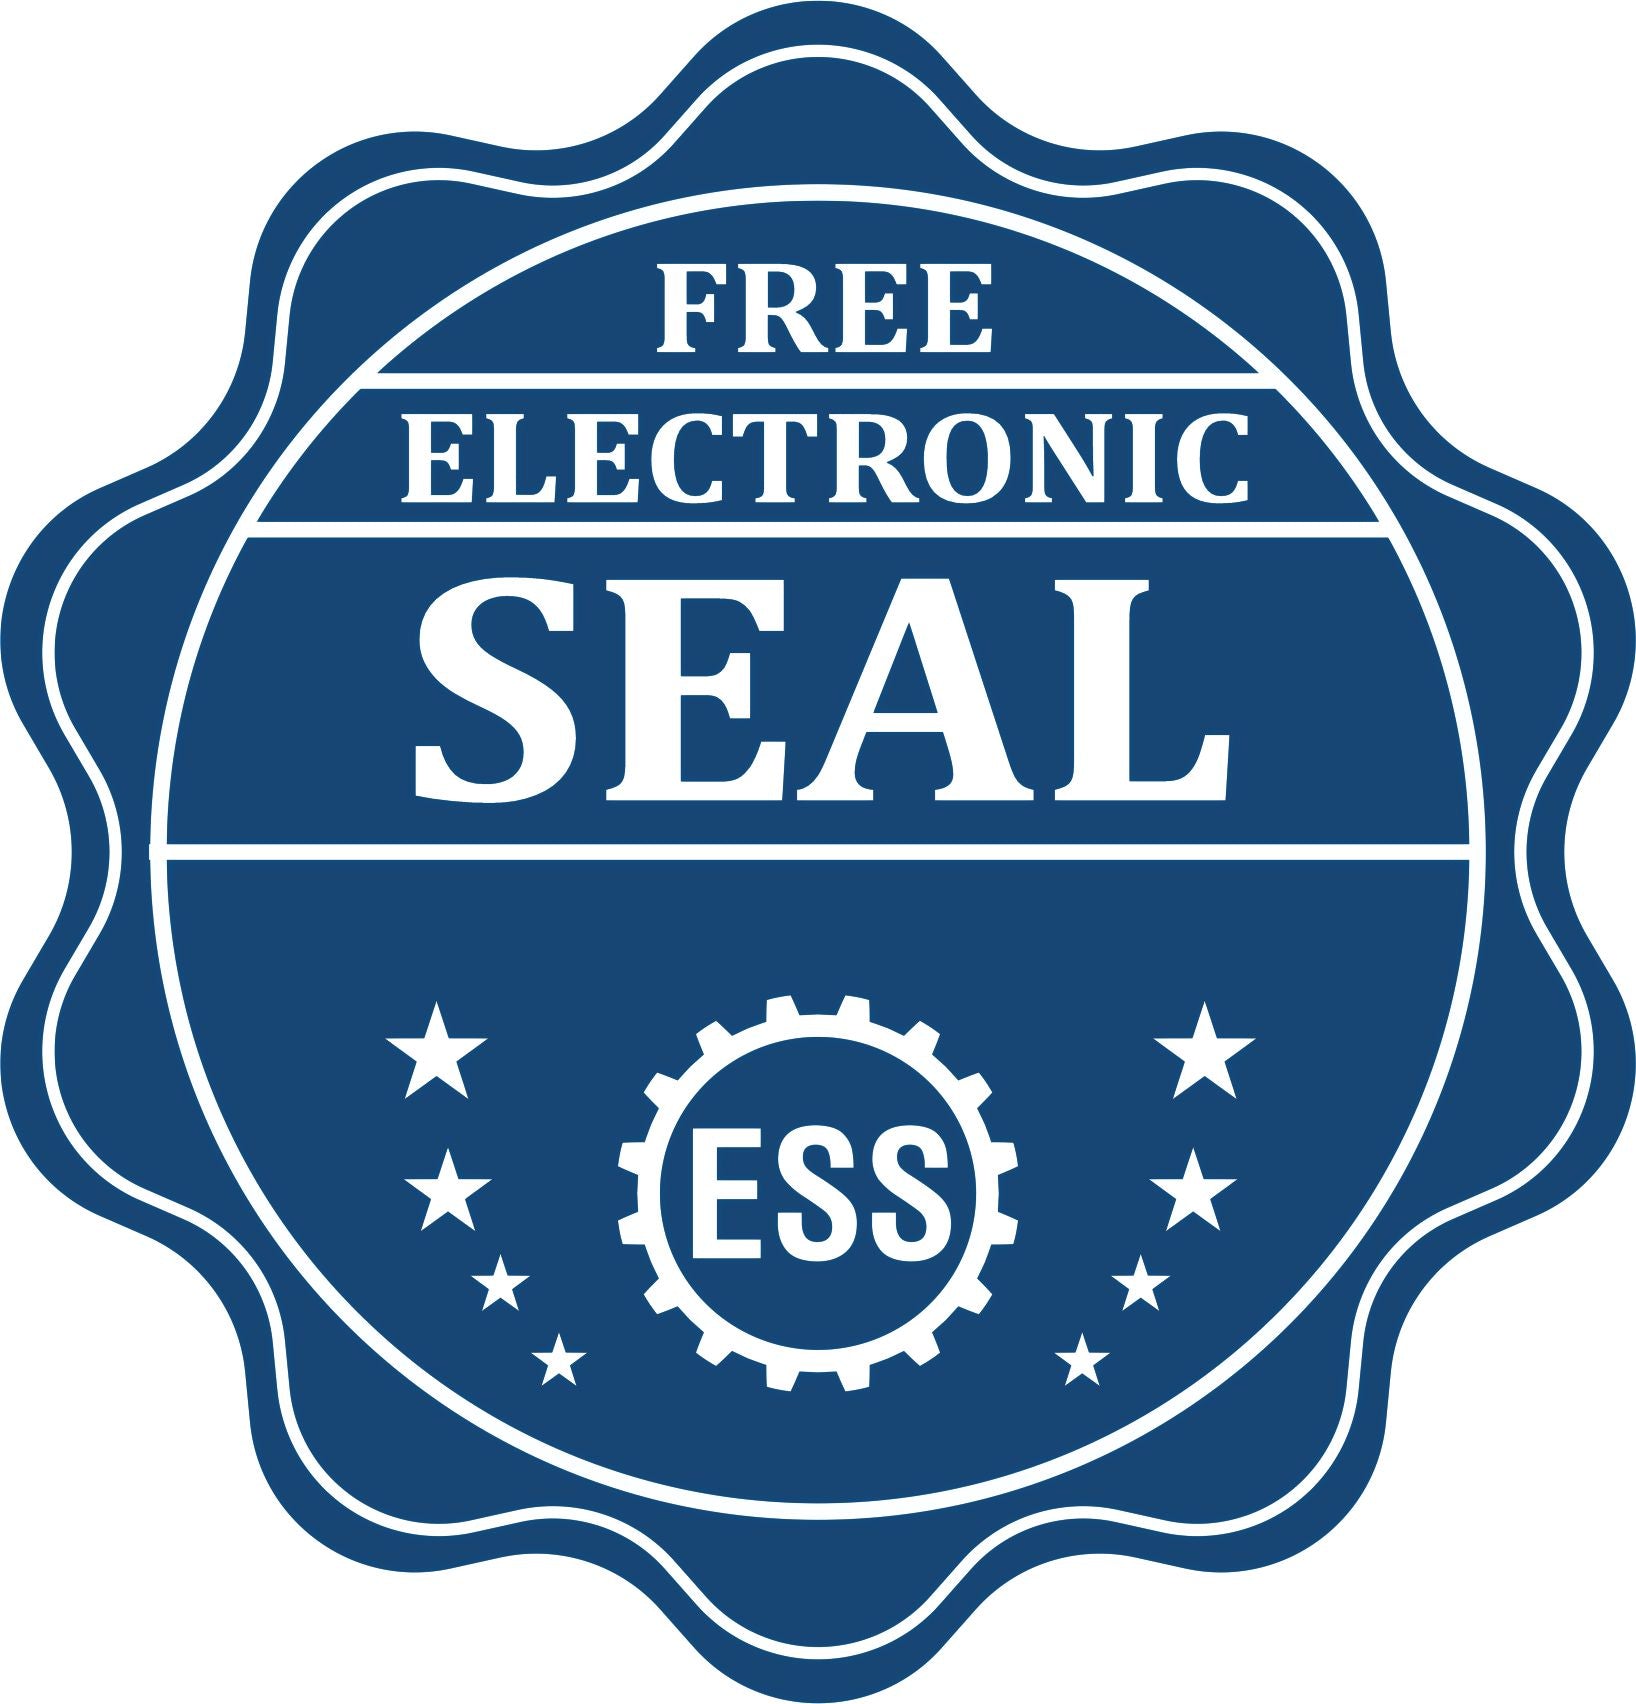 A badge showing a free electronic seal for the Premium MaxLight Pre-Inked South Dakota Landscape Architectural Stamp with stars and the ESS gear on the emblem.